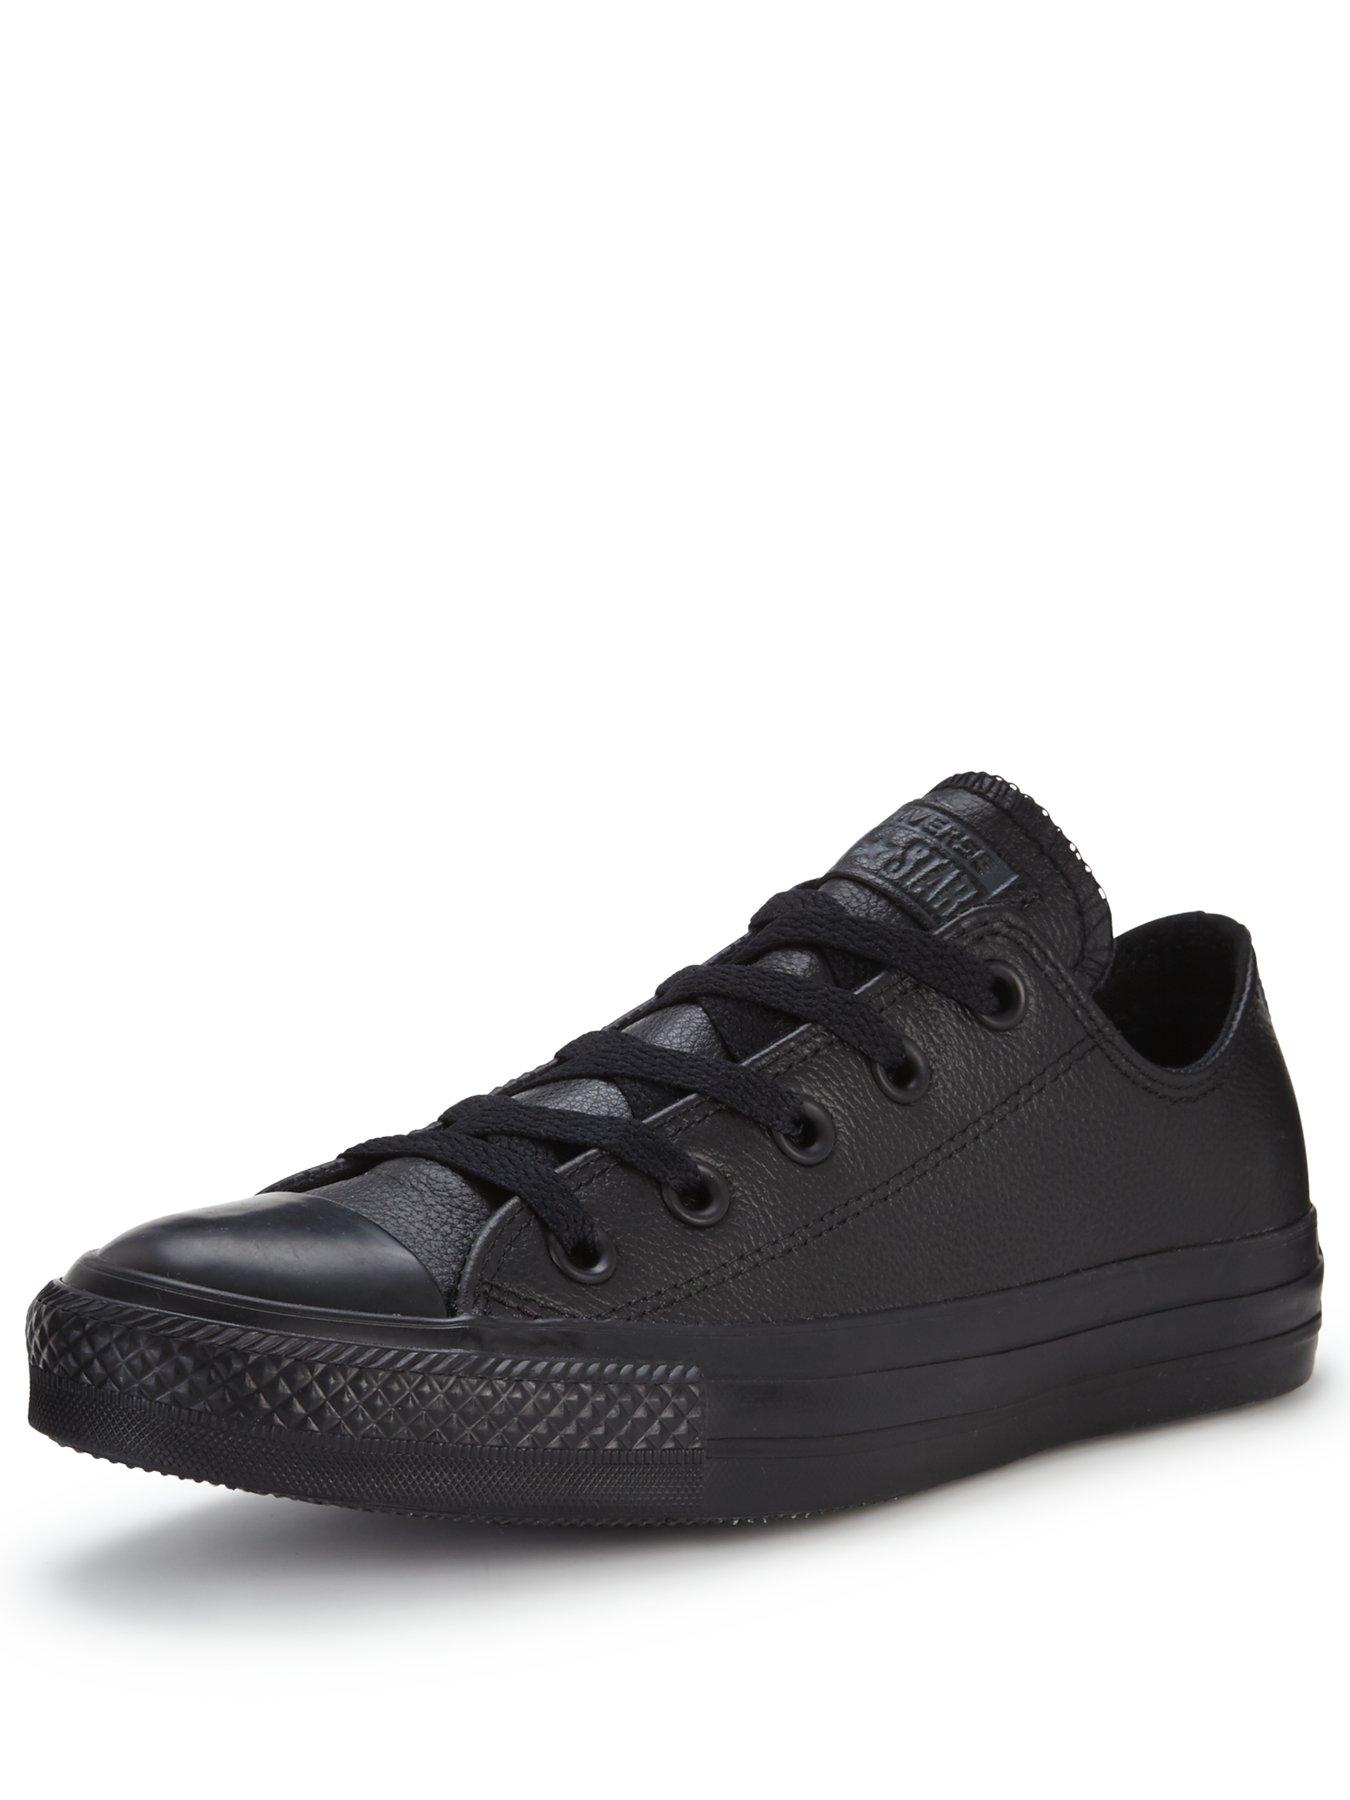 converse all black leather